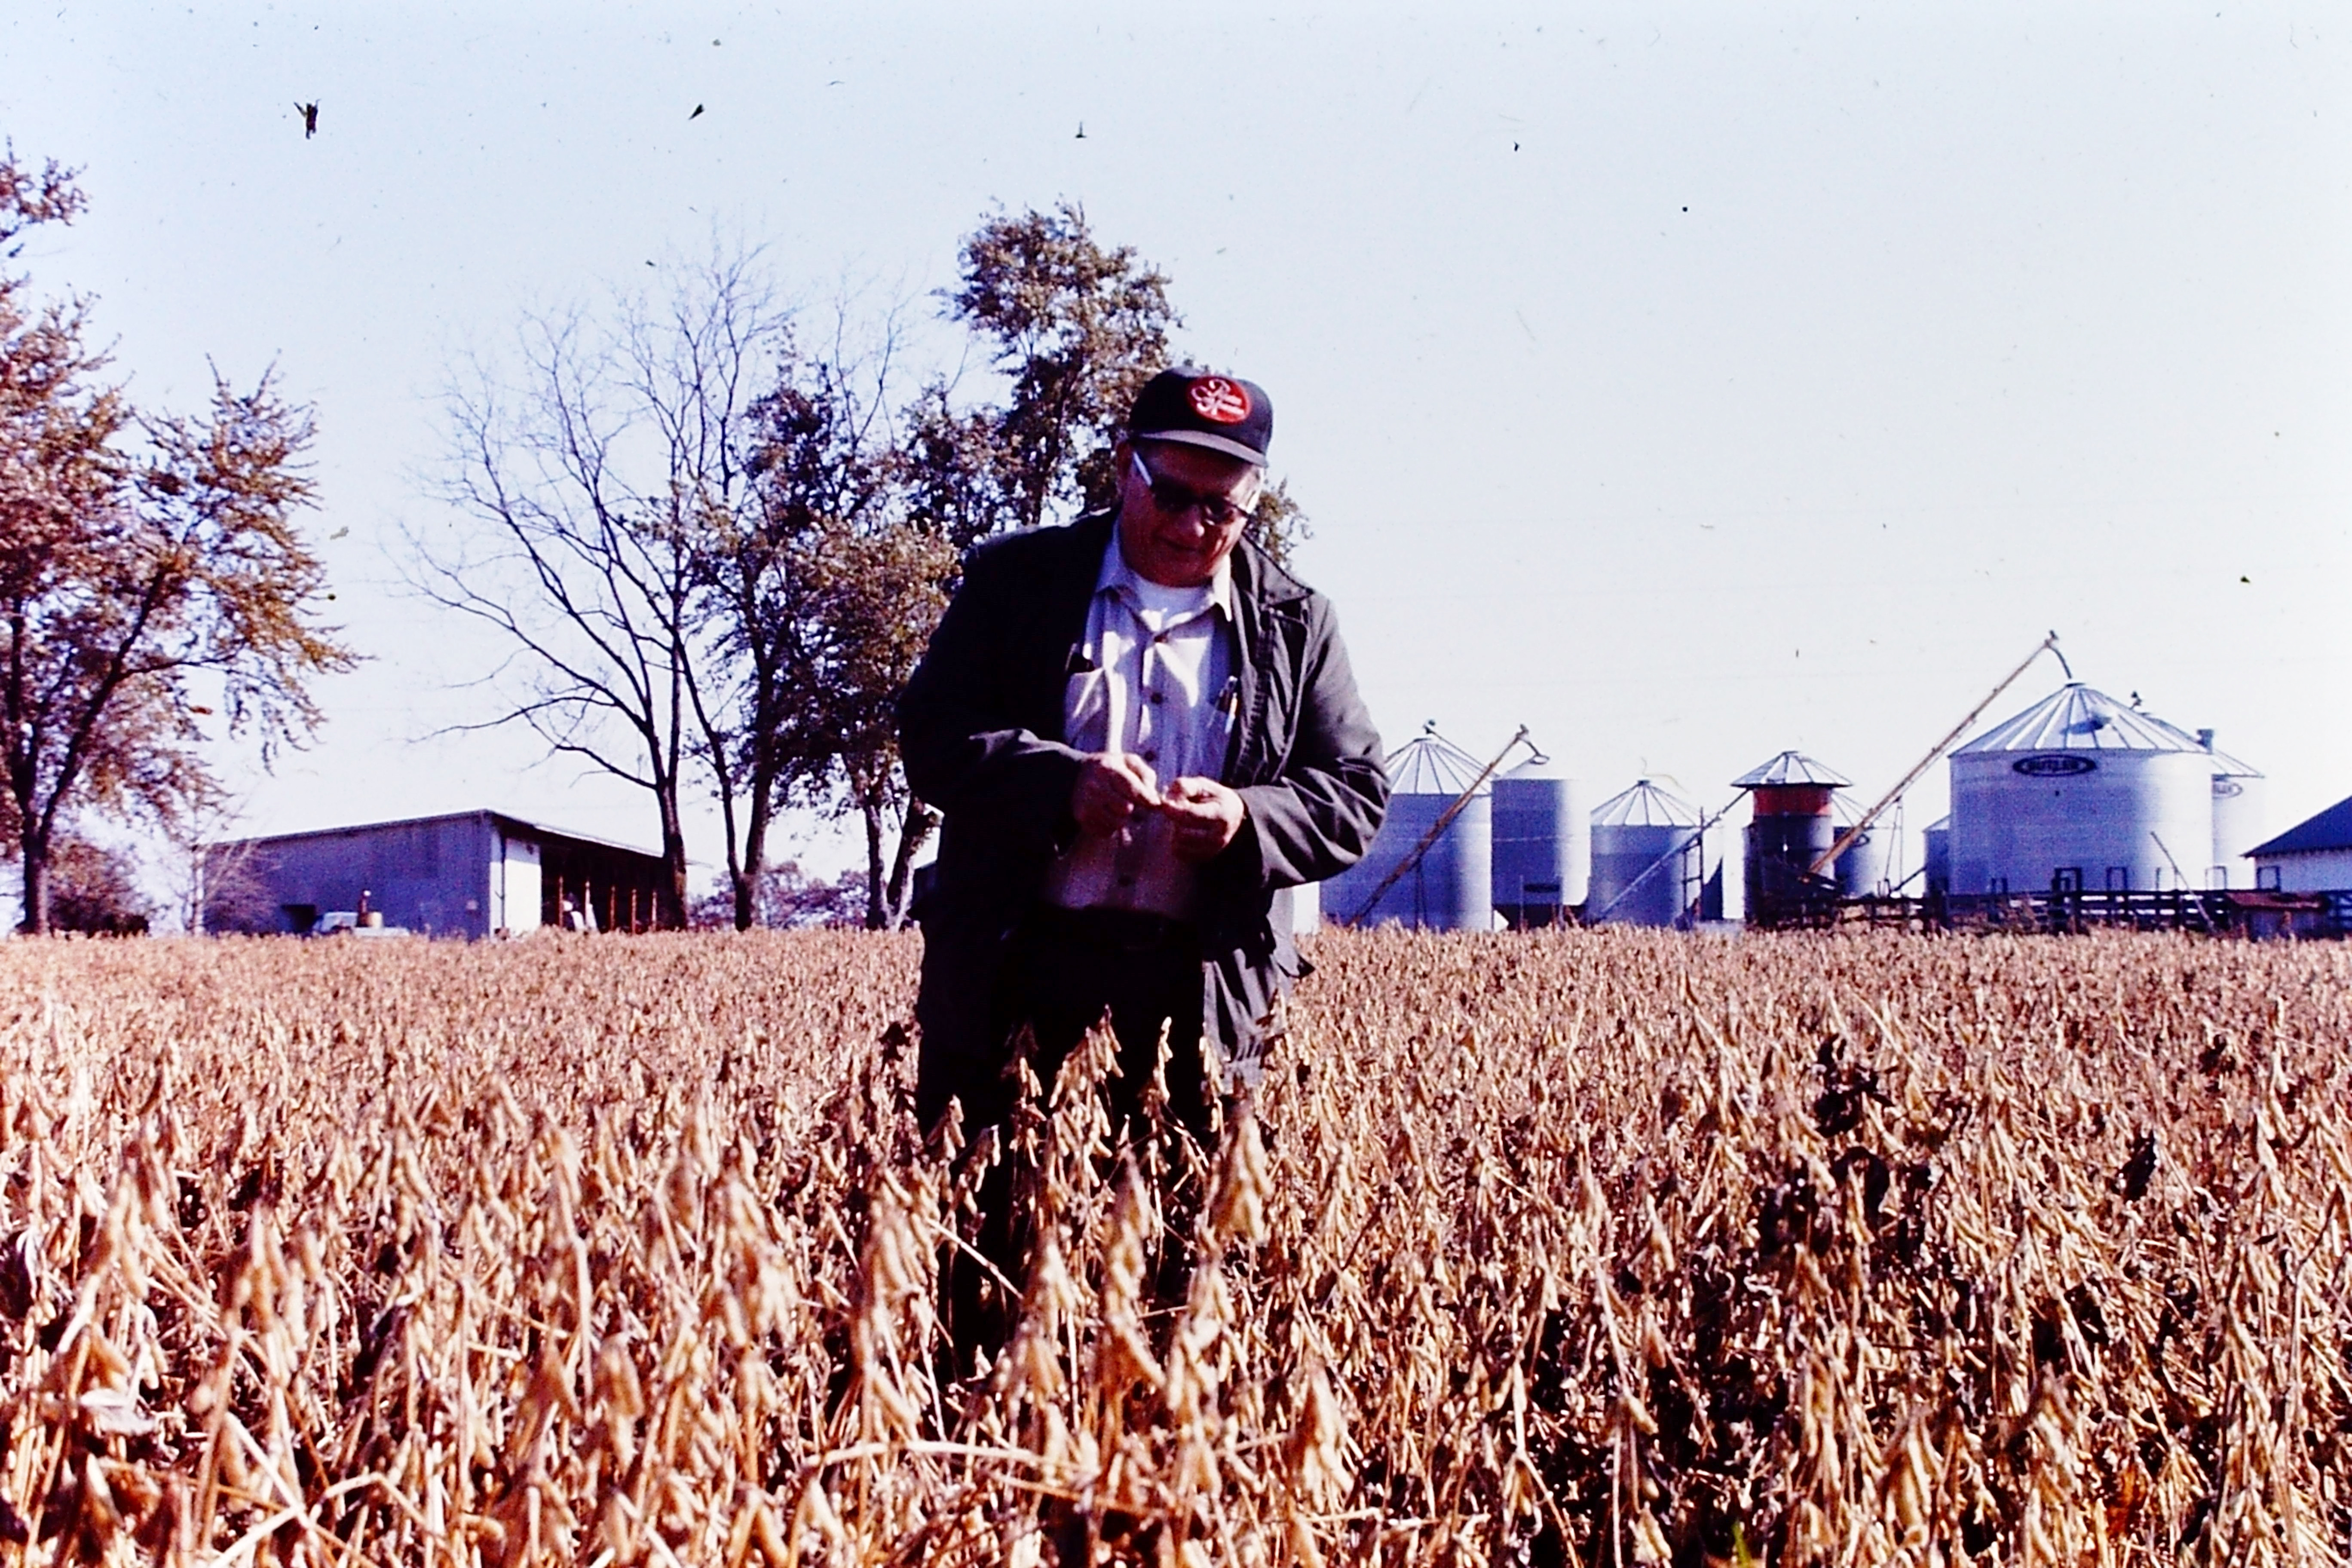 Harry Young looks at pods in a soybean field. Photo courtesy of Alexander Young.